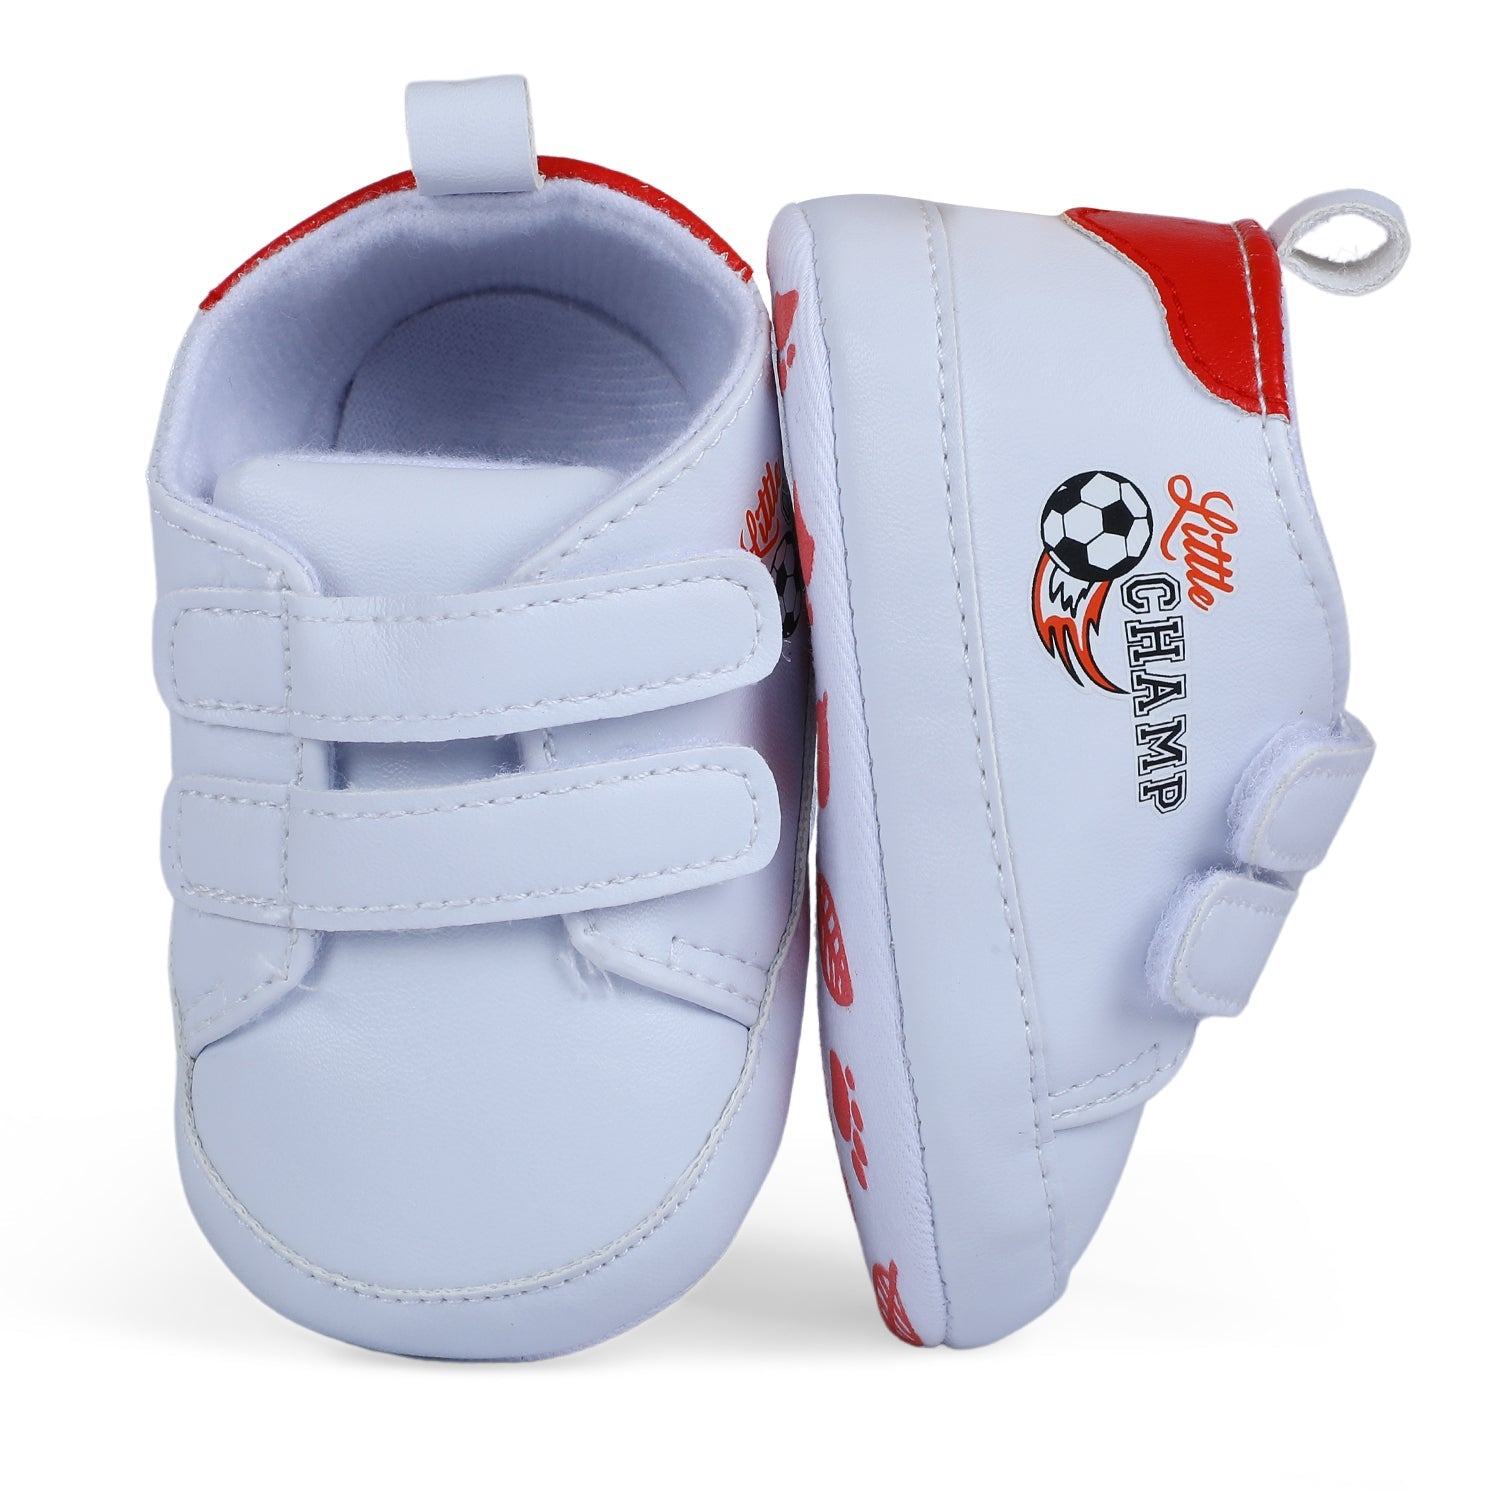 Baby Moo Little Champ Soft Sole Anti-Slip Booties - White